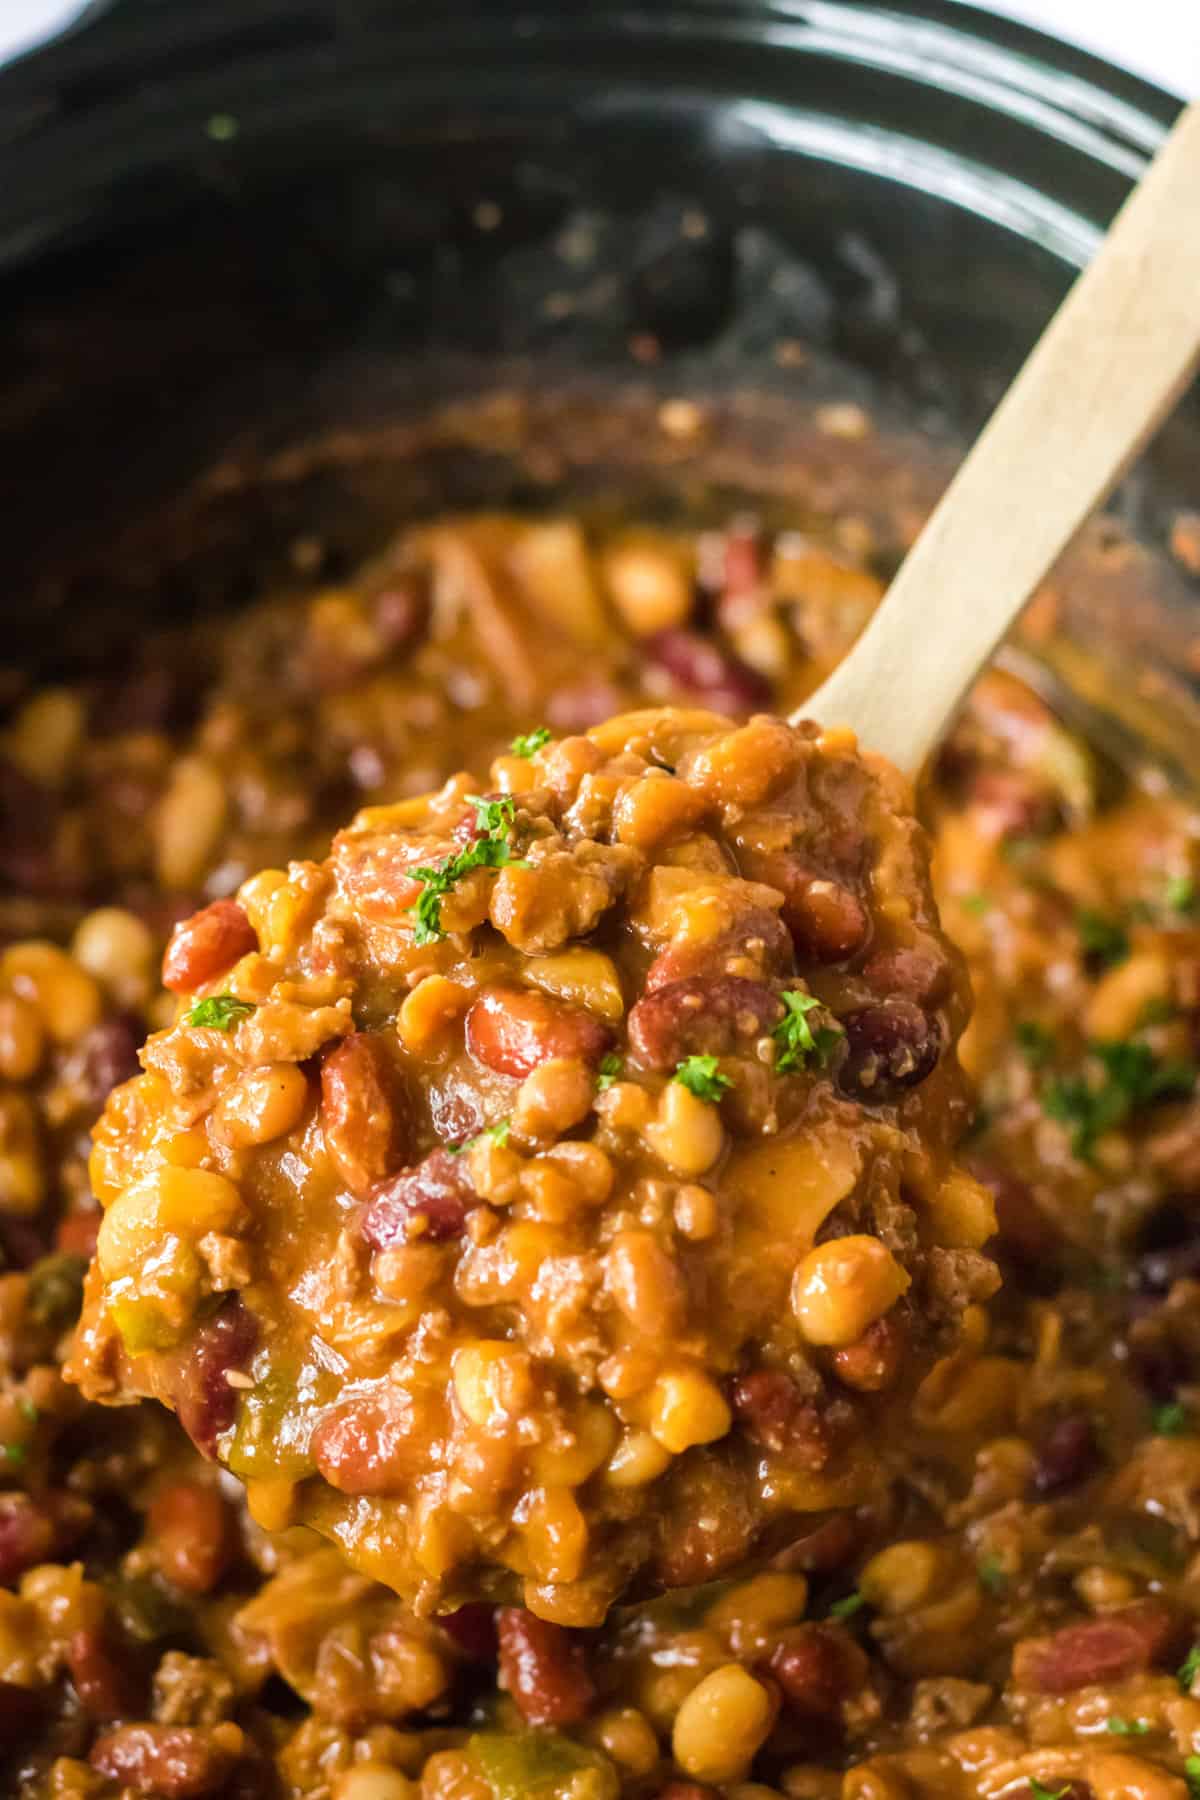 Wooden spoon lifting cowboy beans out from crockpot.